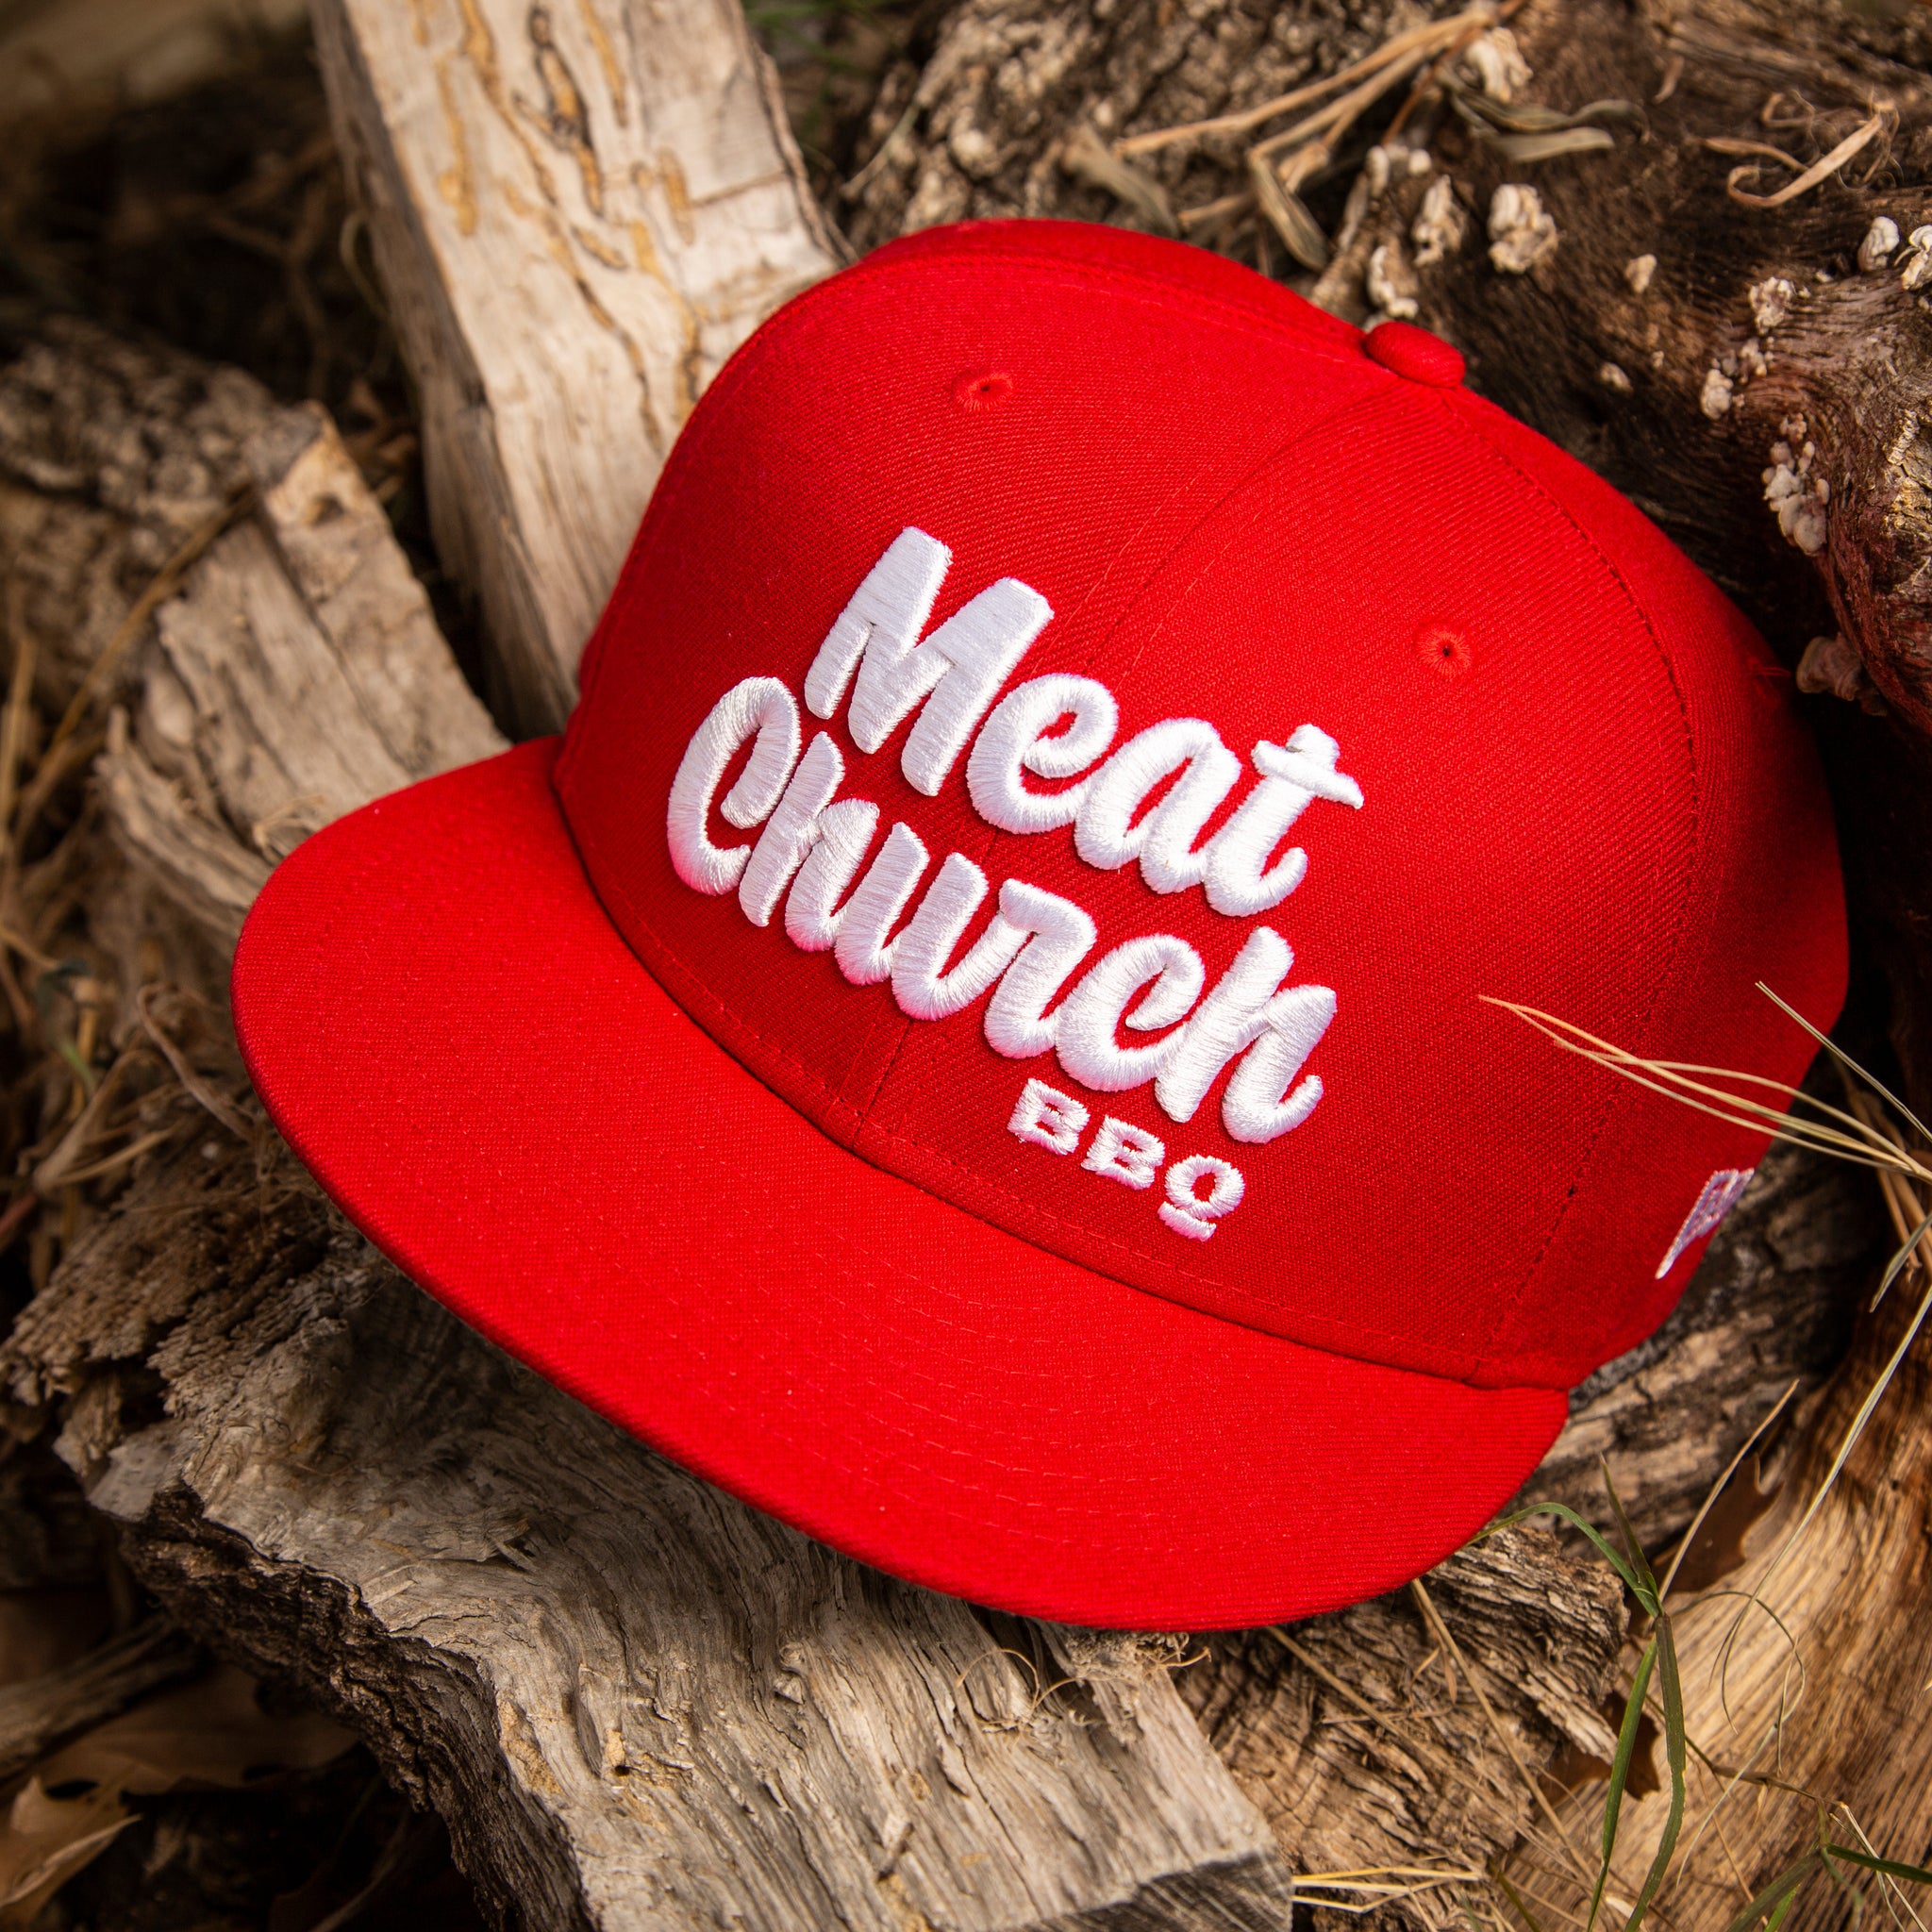 Accountant eiland matig Red New Era Fitted Hat – Meat Church